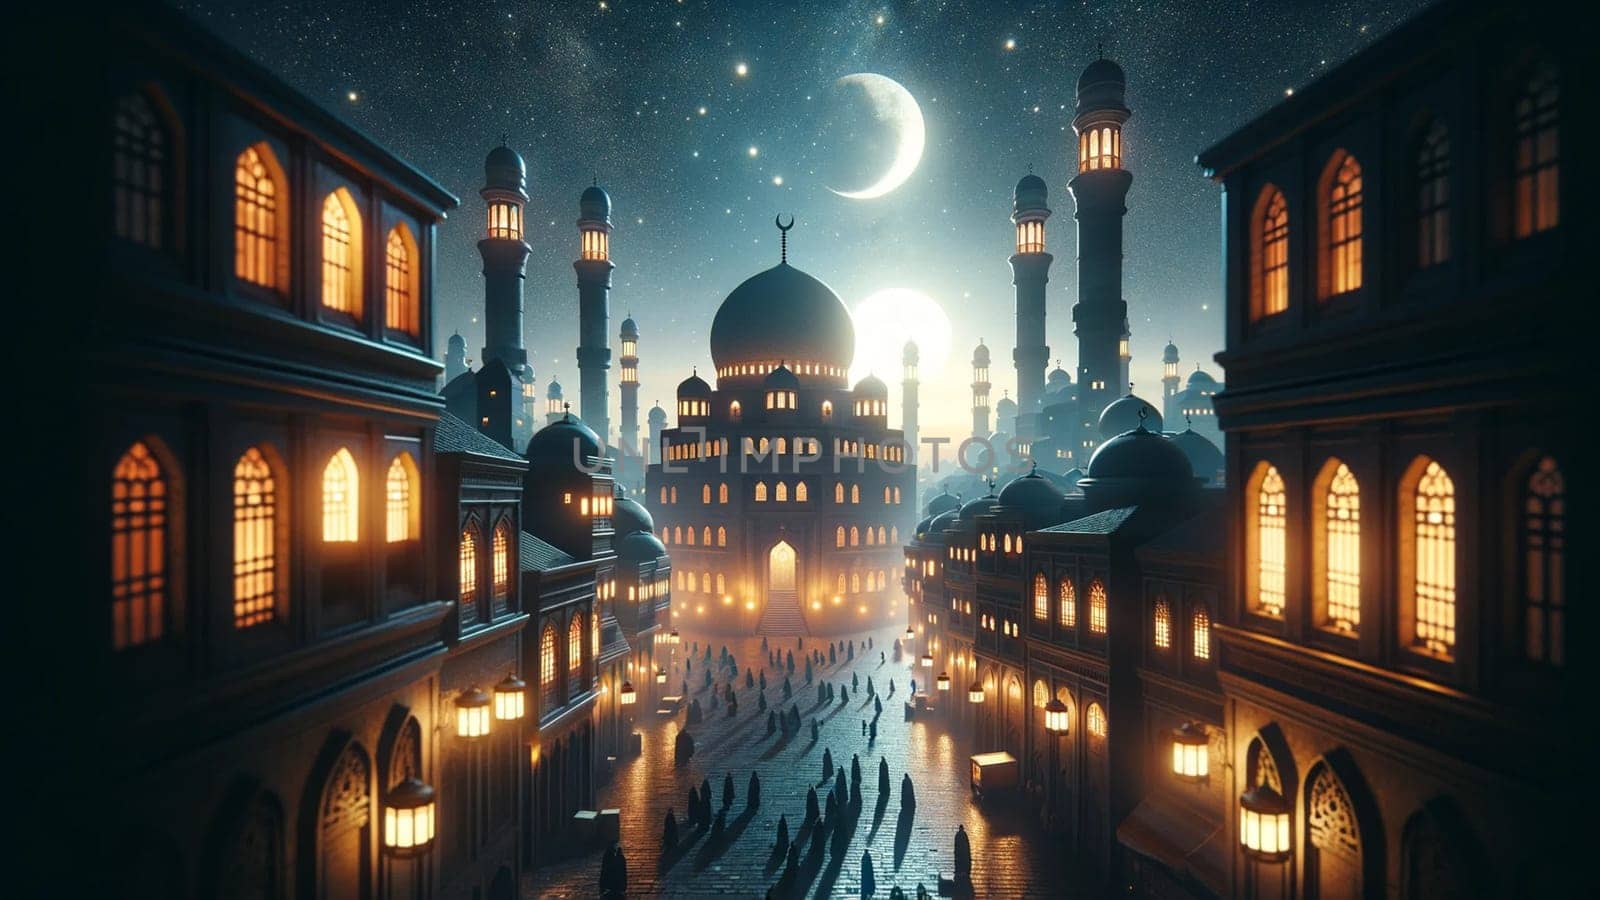 Enchanted Ramadan Nights: A Majestic Mosque under the Crescent Moon by Designlab